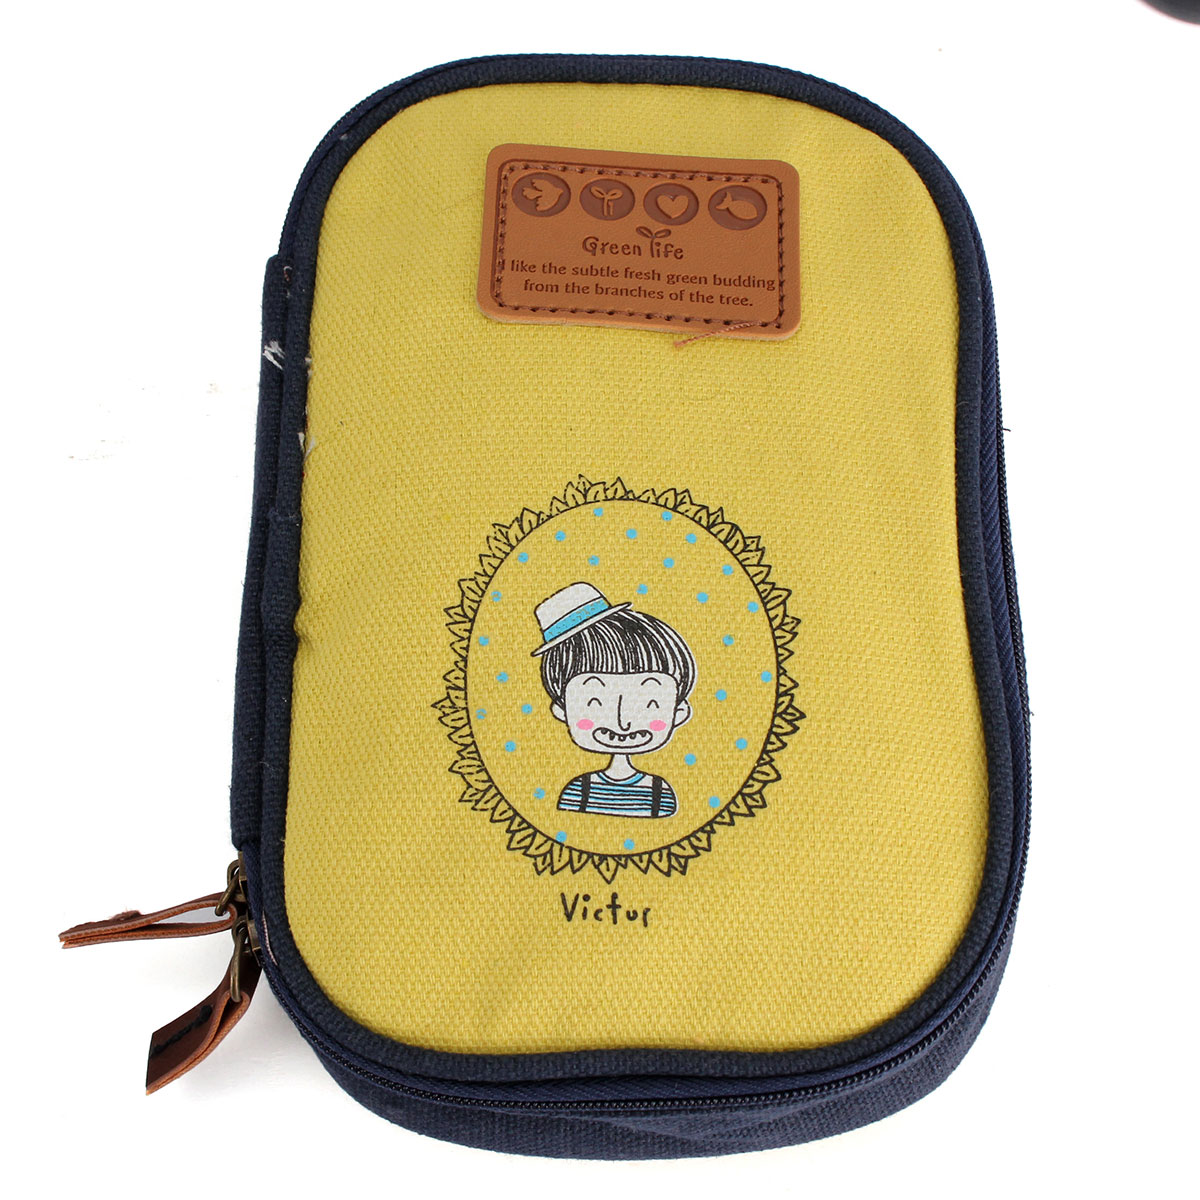 Childhood-Memory-Pencil-Case-Time-Canvas-Coin-Purse-Cosmetic-Bag-Double-Zipper-Storage-Bag-Multifunc-1558124-6